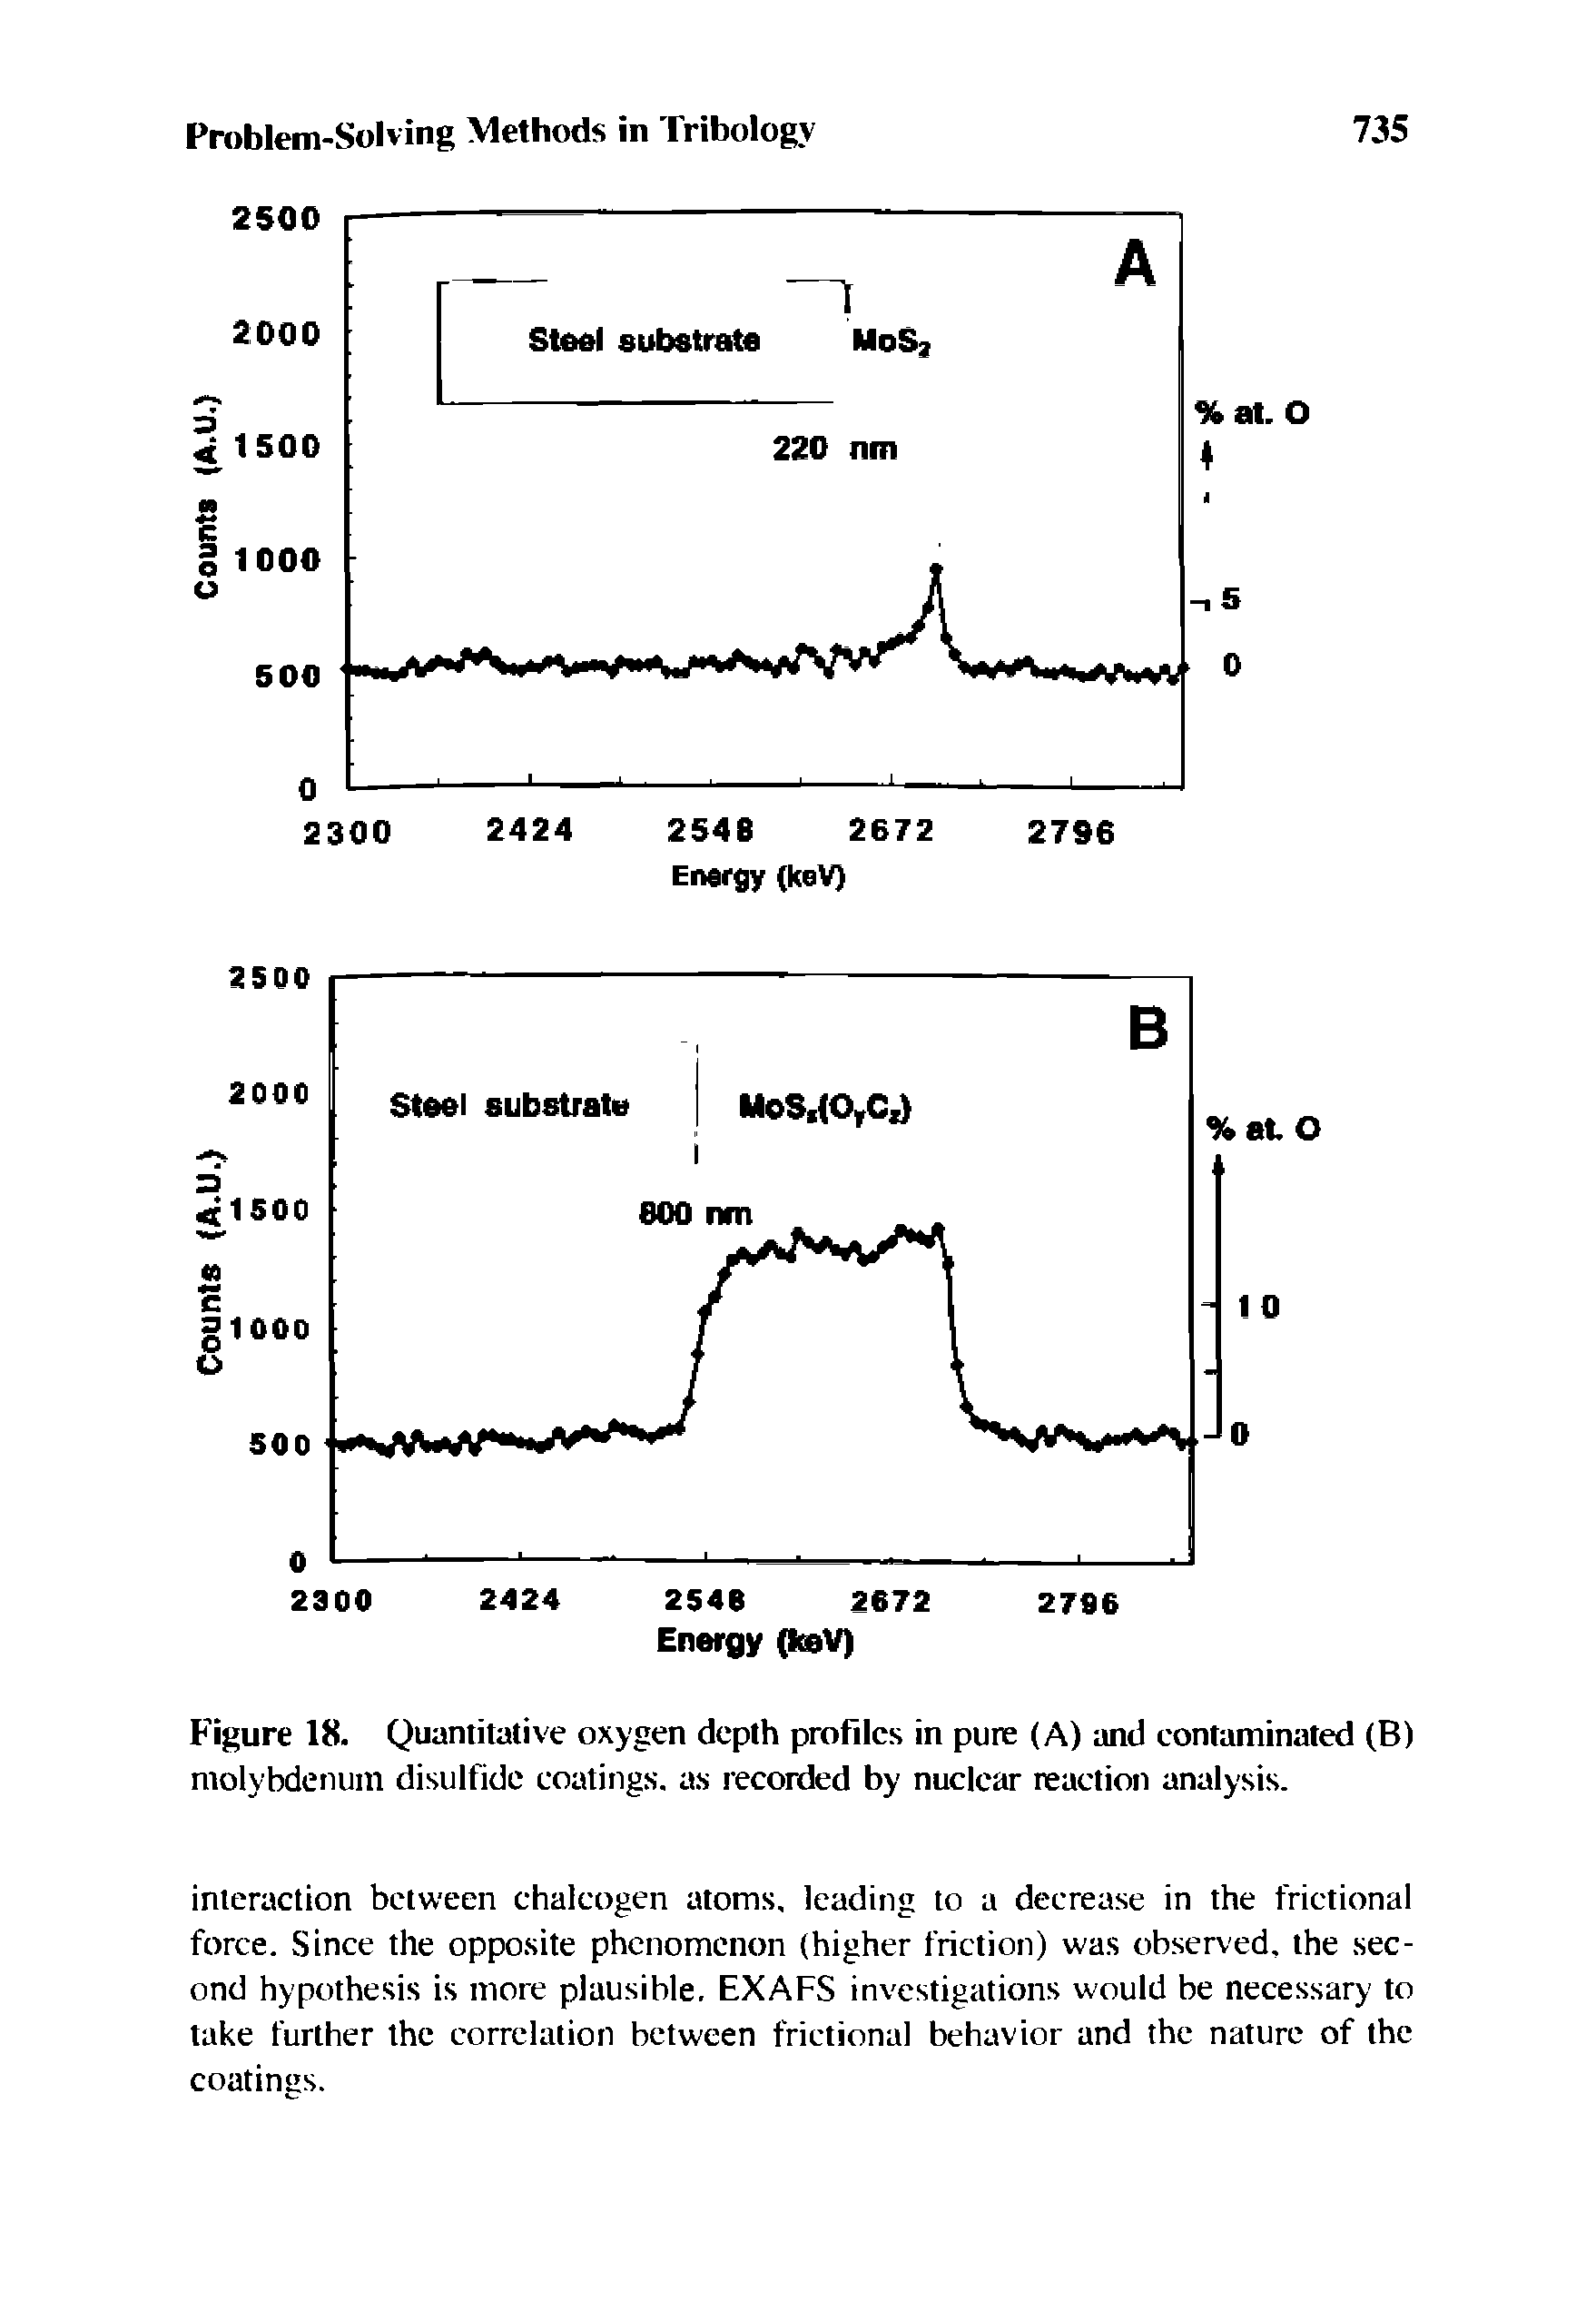 Figure 18. Quantitative oxygen depth profiles in pure (A) and contaminated (B) molybdenum disulfide coatings. a.s recorded by nuclear reaction analysis.